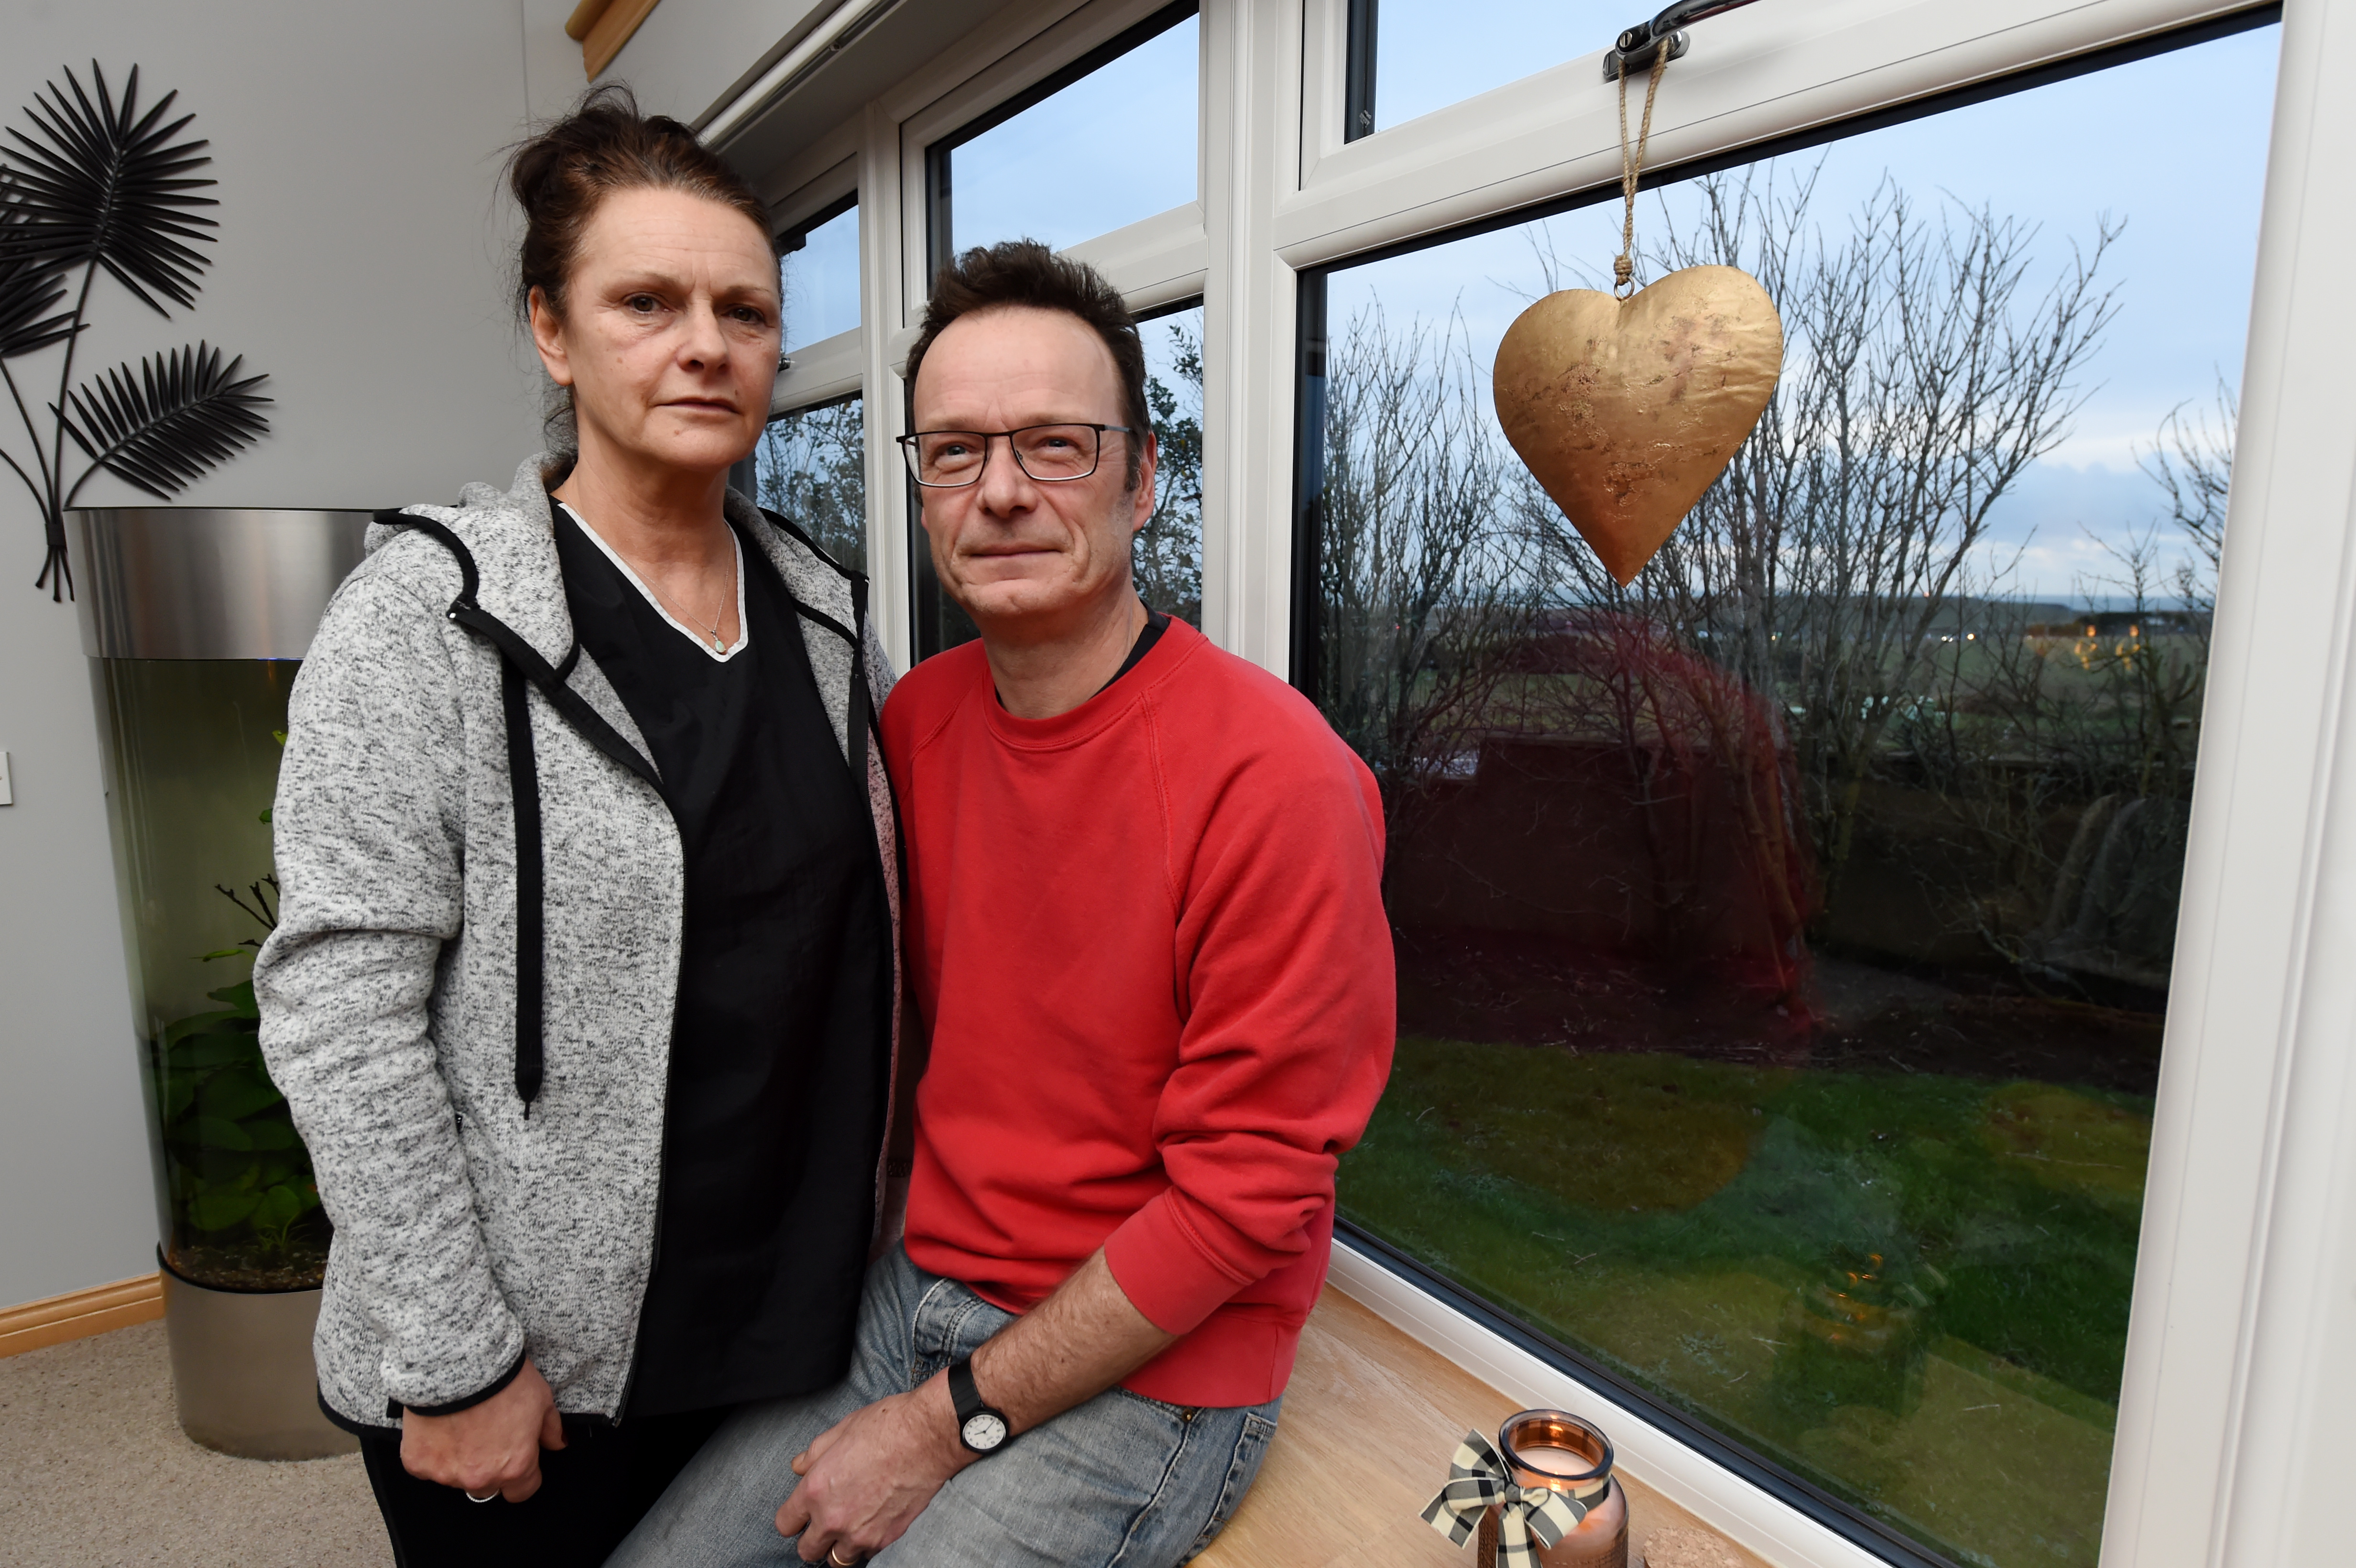 Audrey Ross-Barnett and Nick Barnett, from Balmedie, are battling to get compensation for damage they claim was caused by AWPR works.